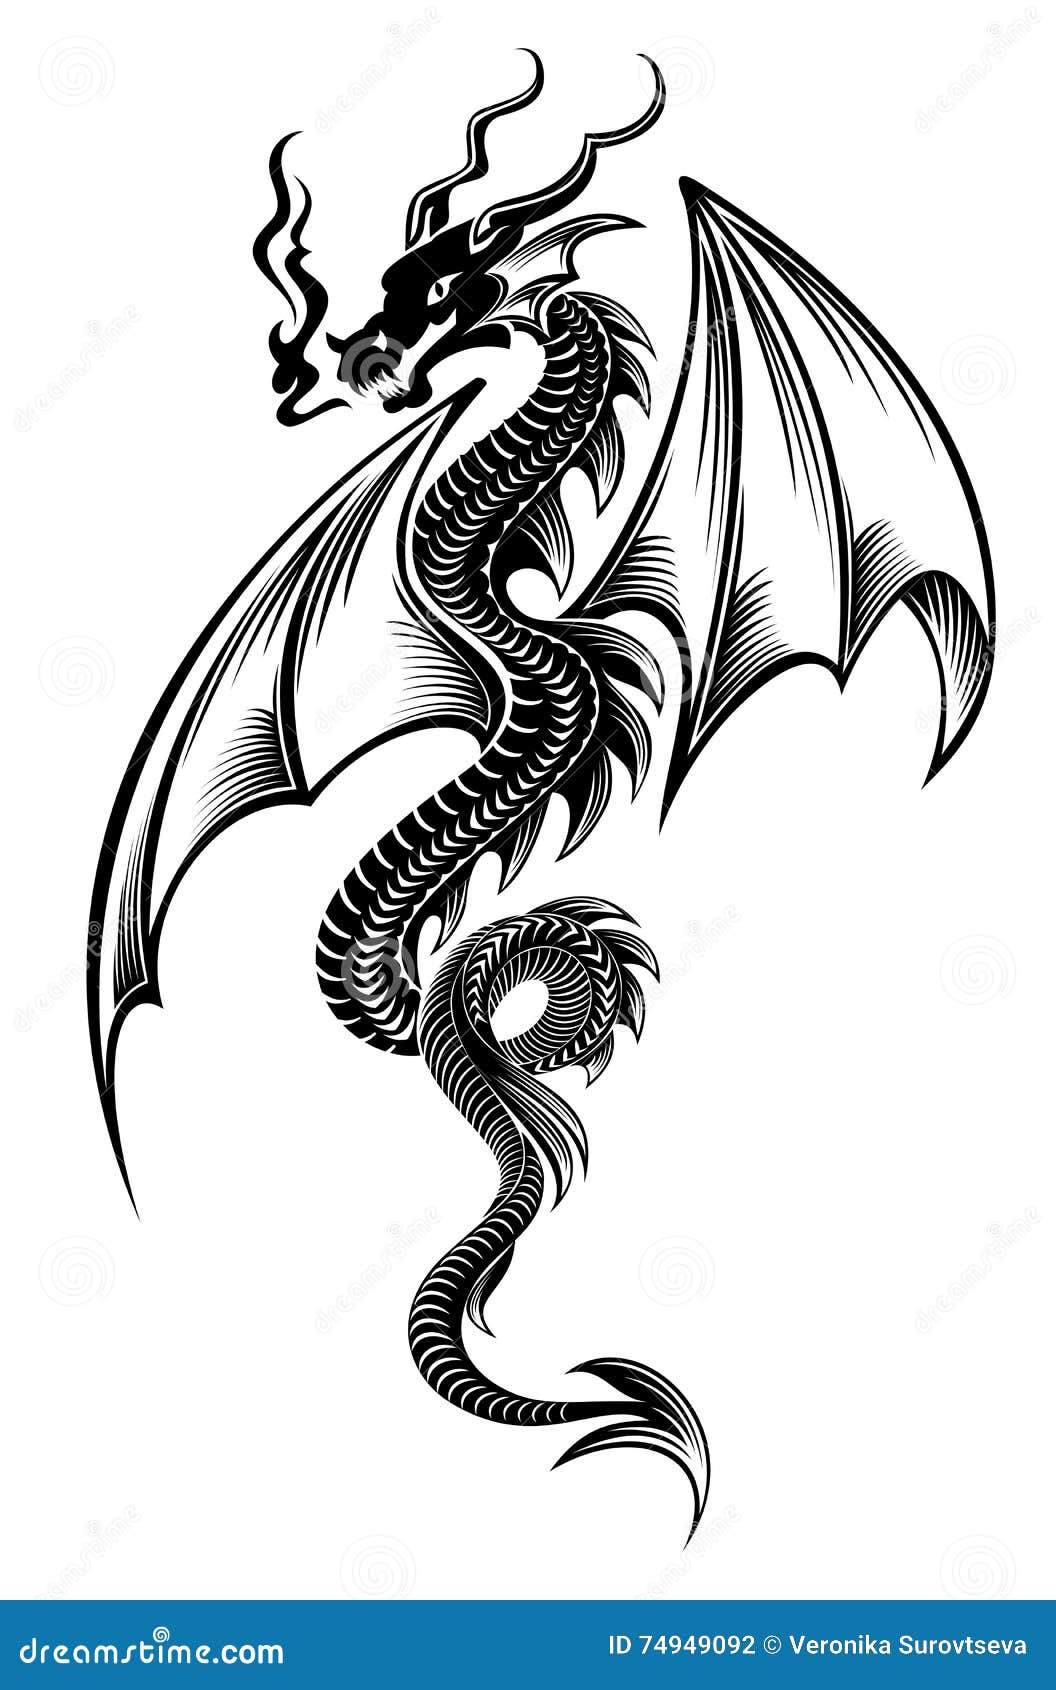 Dragon Tribal Tattoos Free Vector And Graphic 52716149